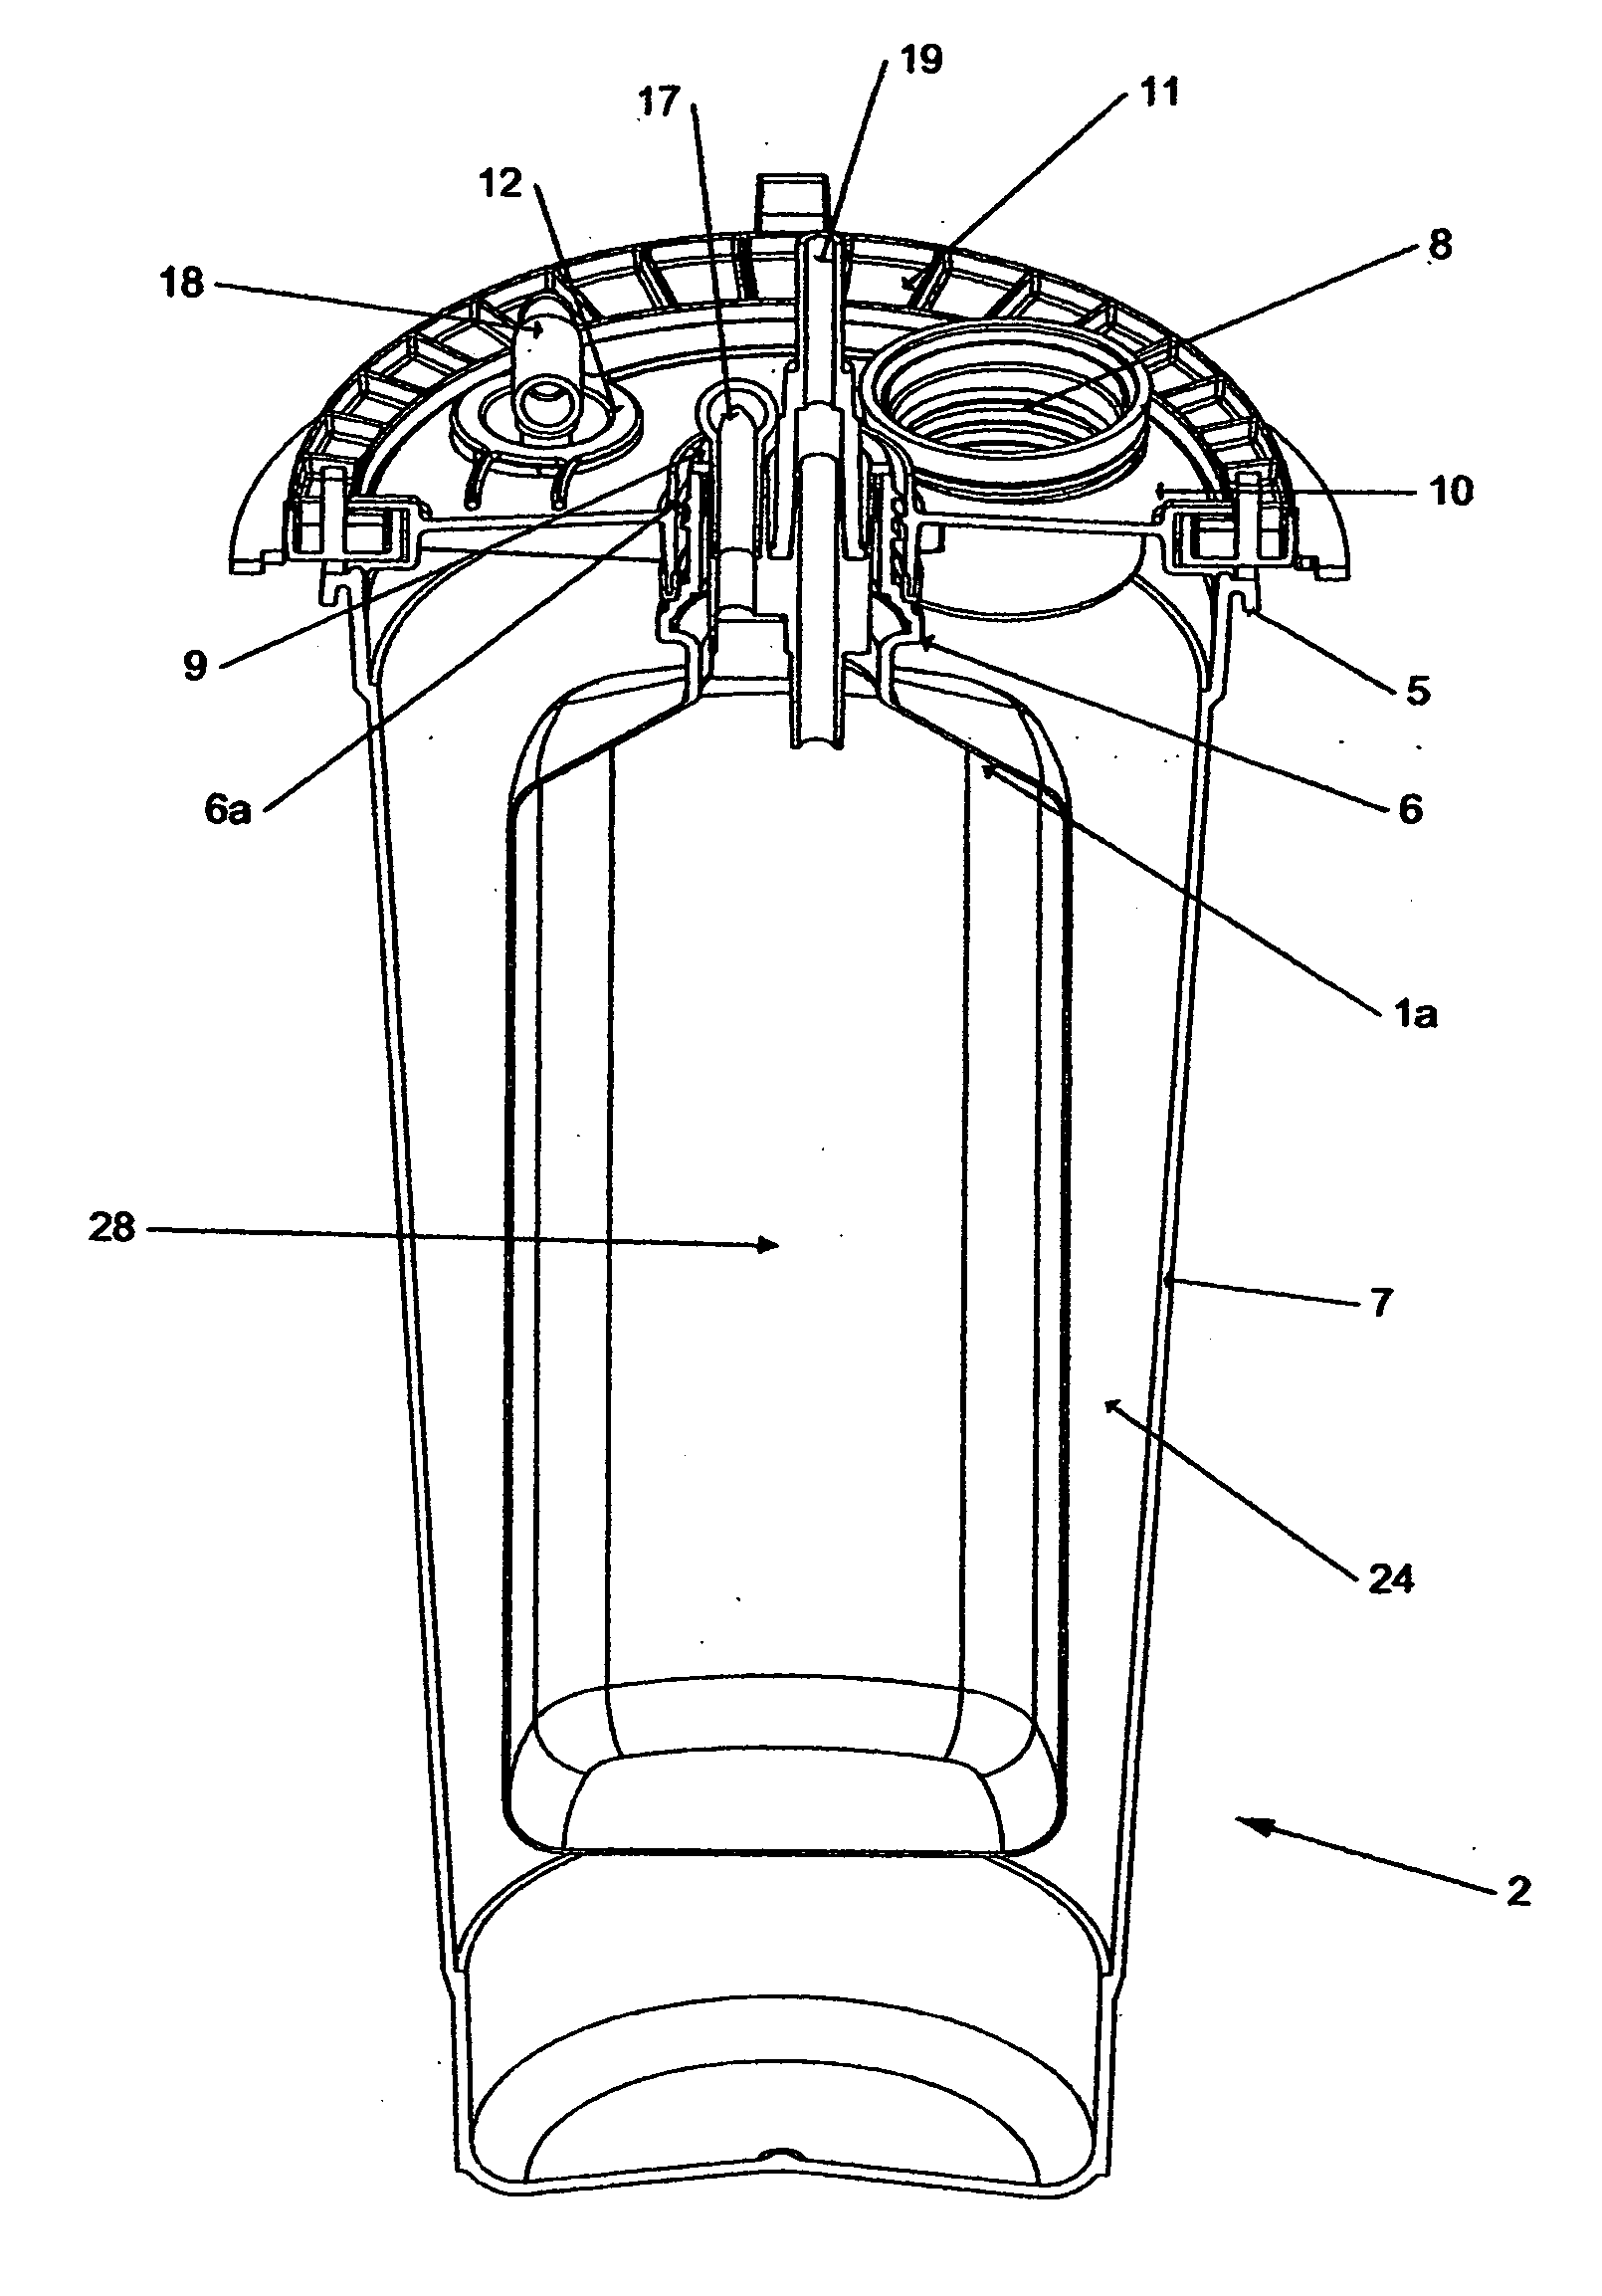 Method and apparatus for transforming a delivery container into a waste disposal system